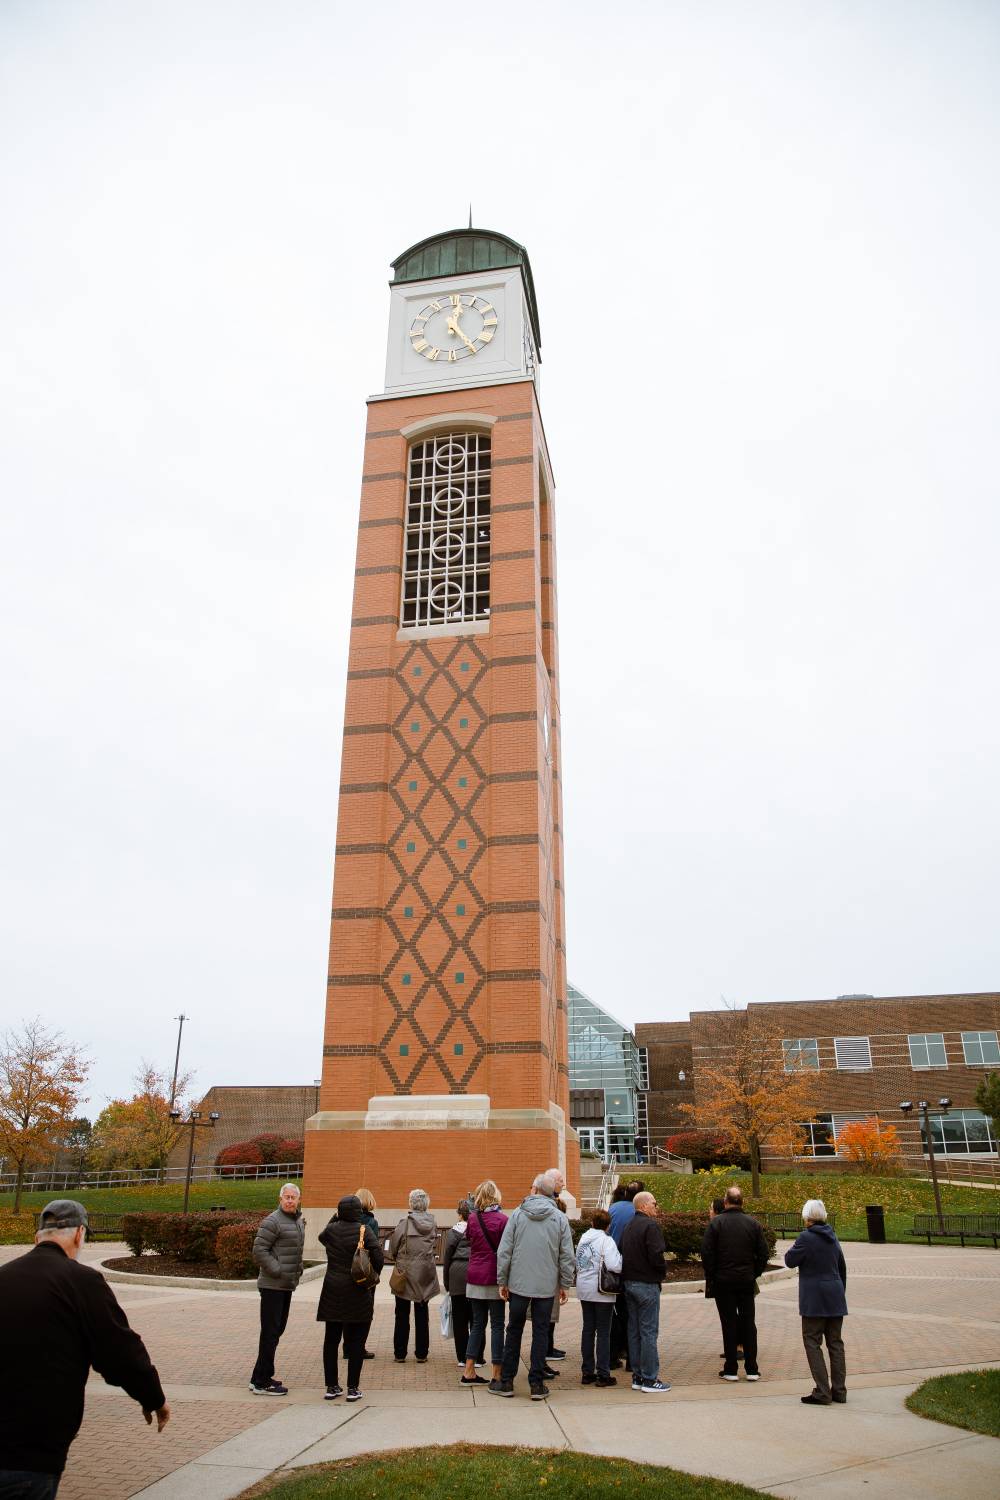 group infront of the clock tower